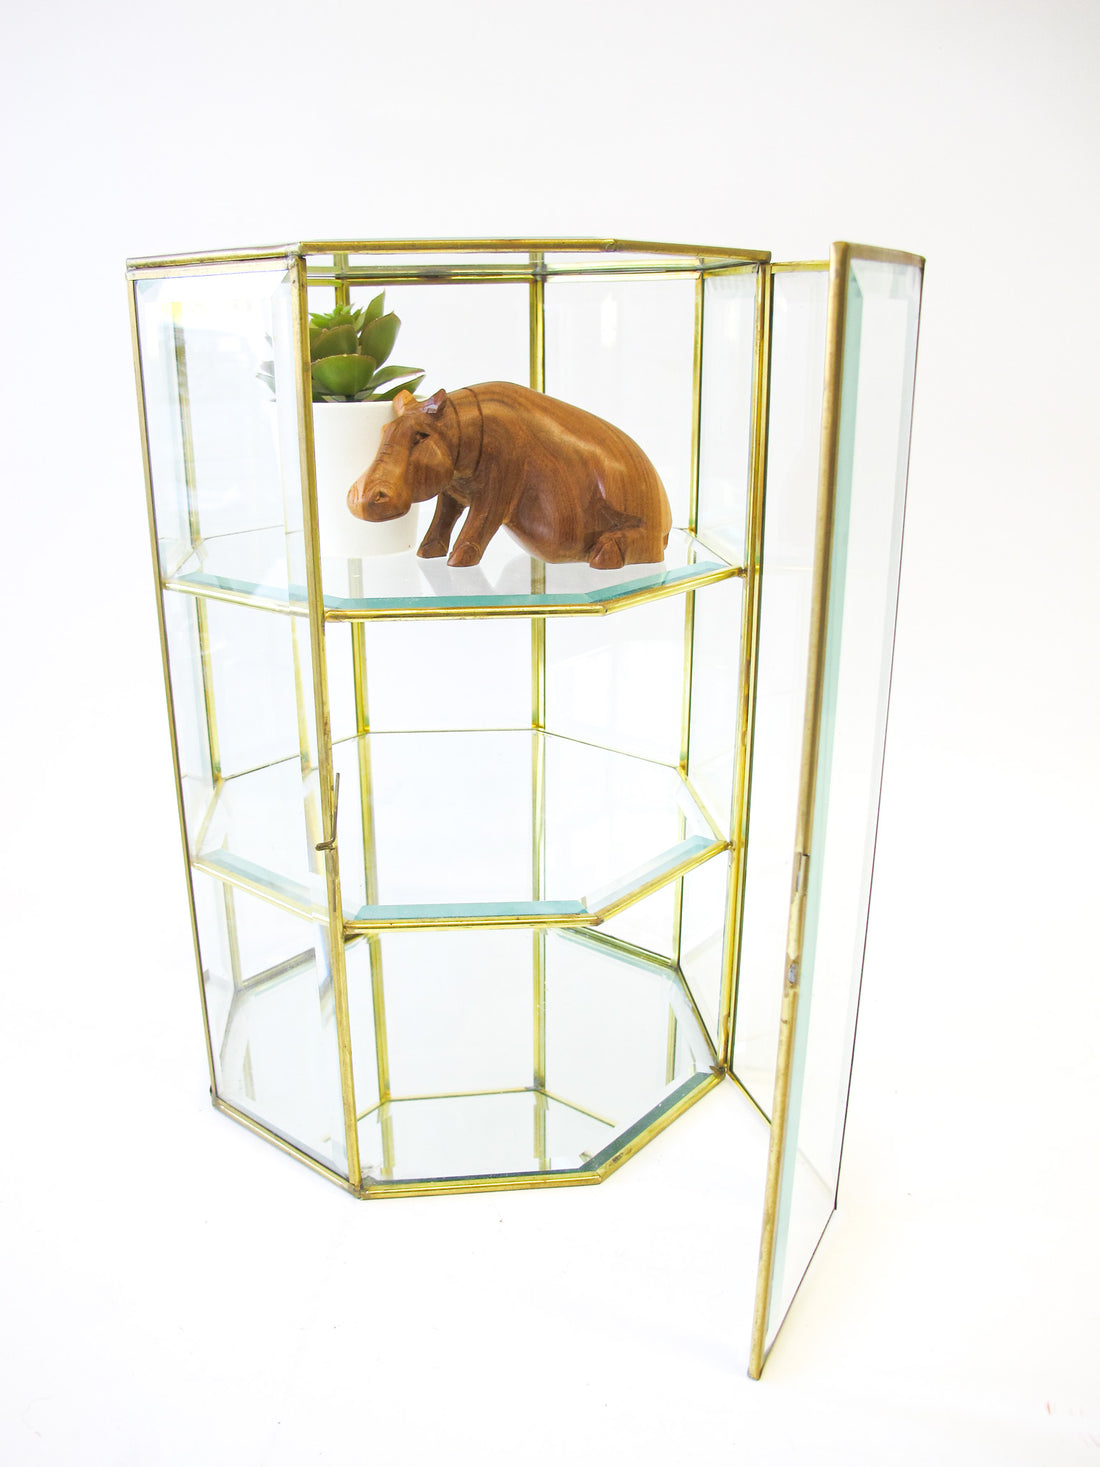 Octagonal Glass and Brass Display Case